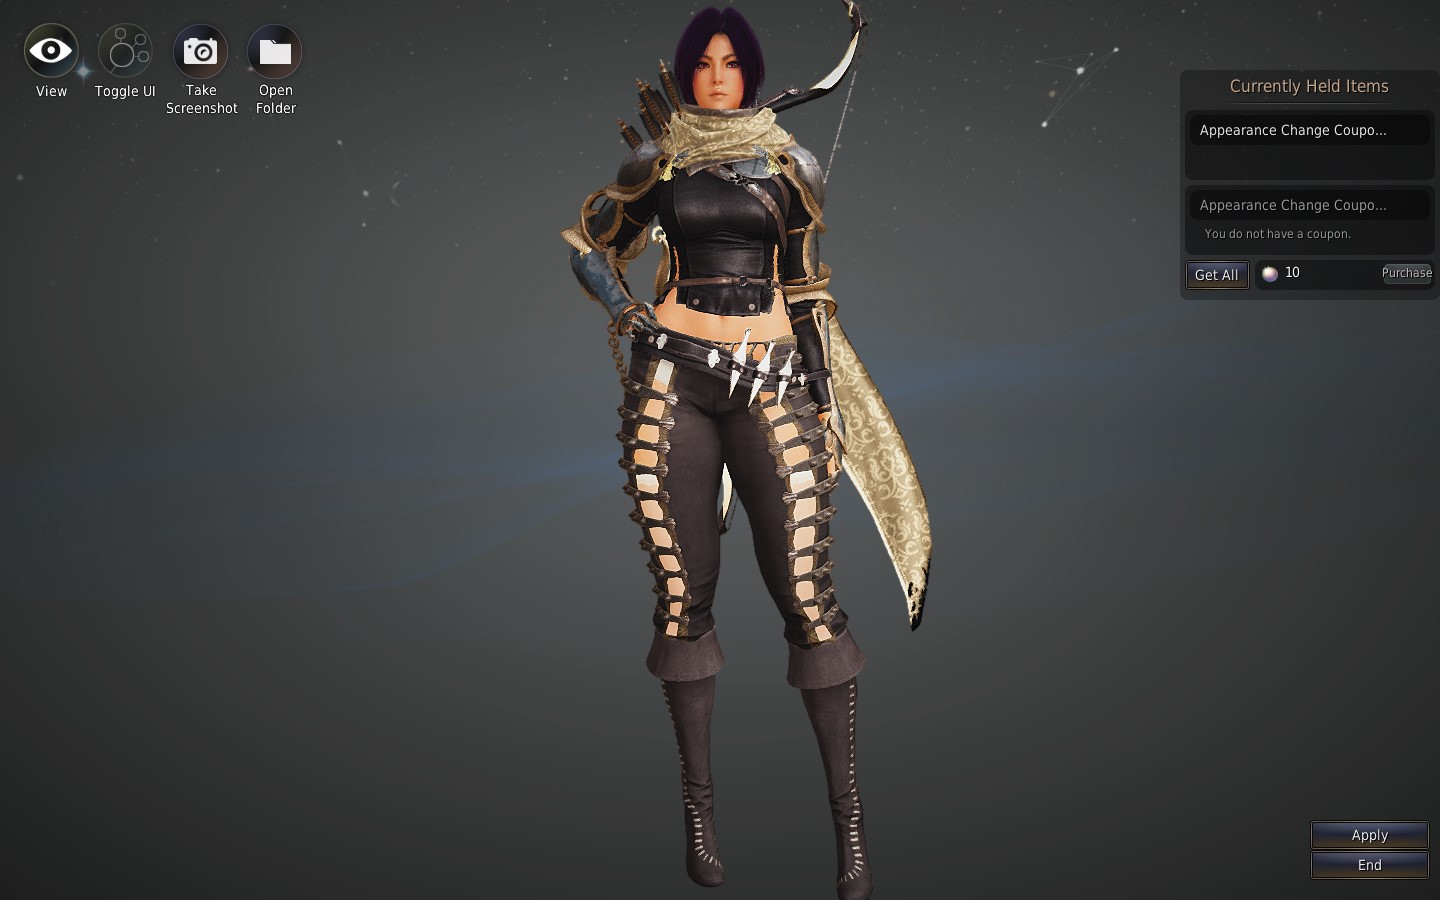 Image is about Bdo Ranger Bern Outfit.